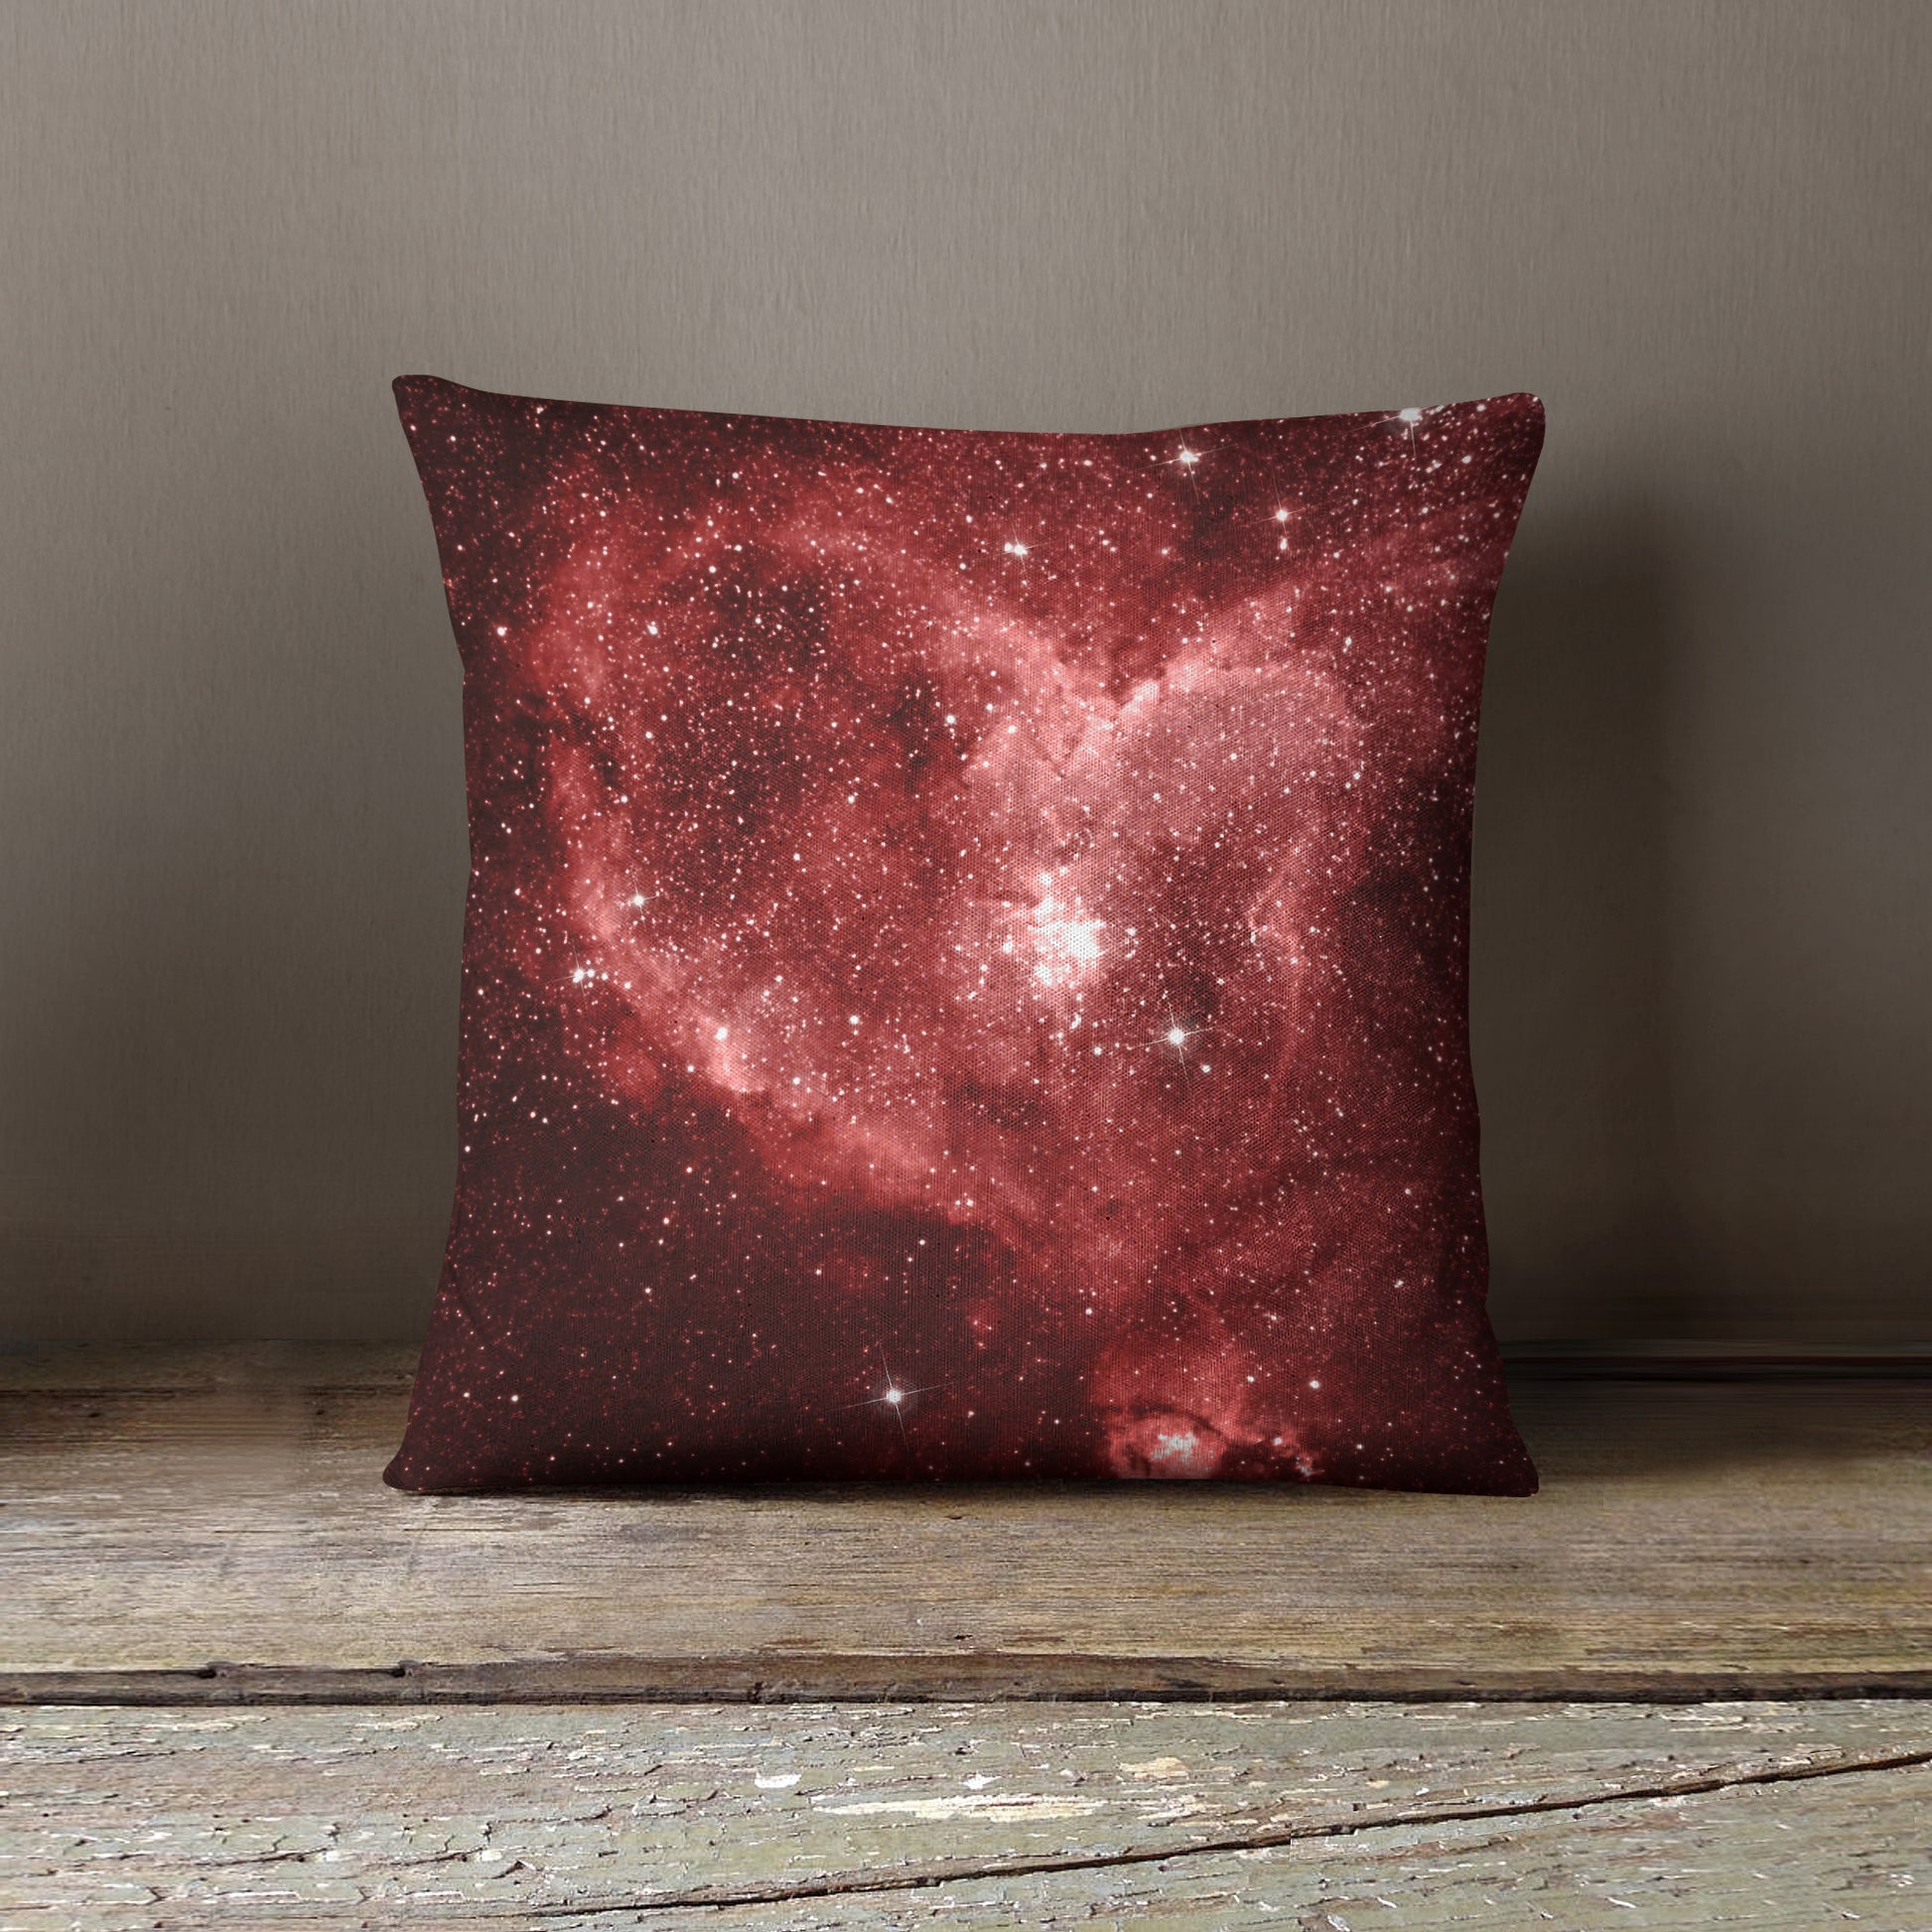 Space Cushion - Red Heart - The Tiny Art Co